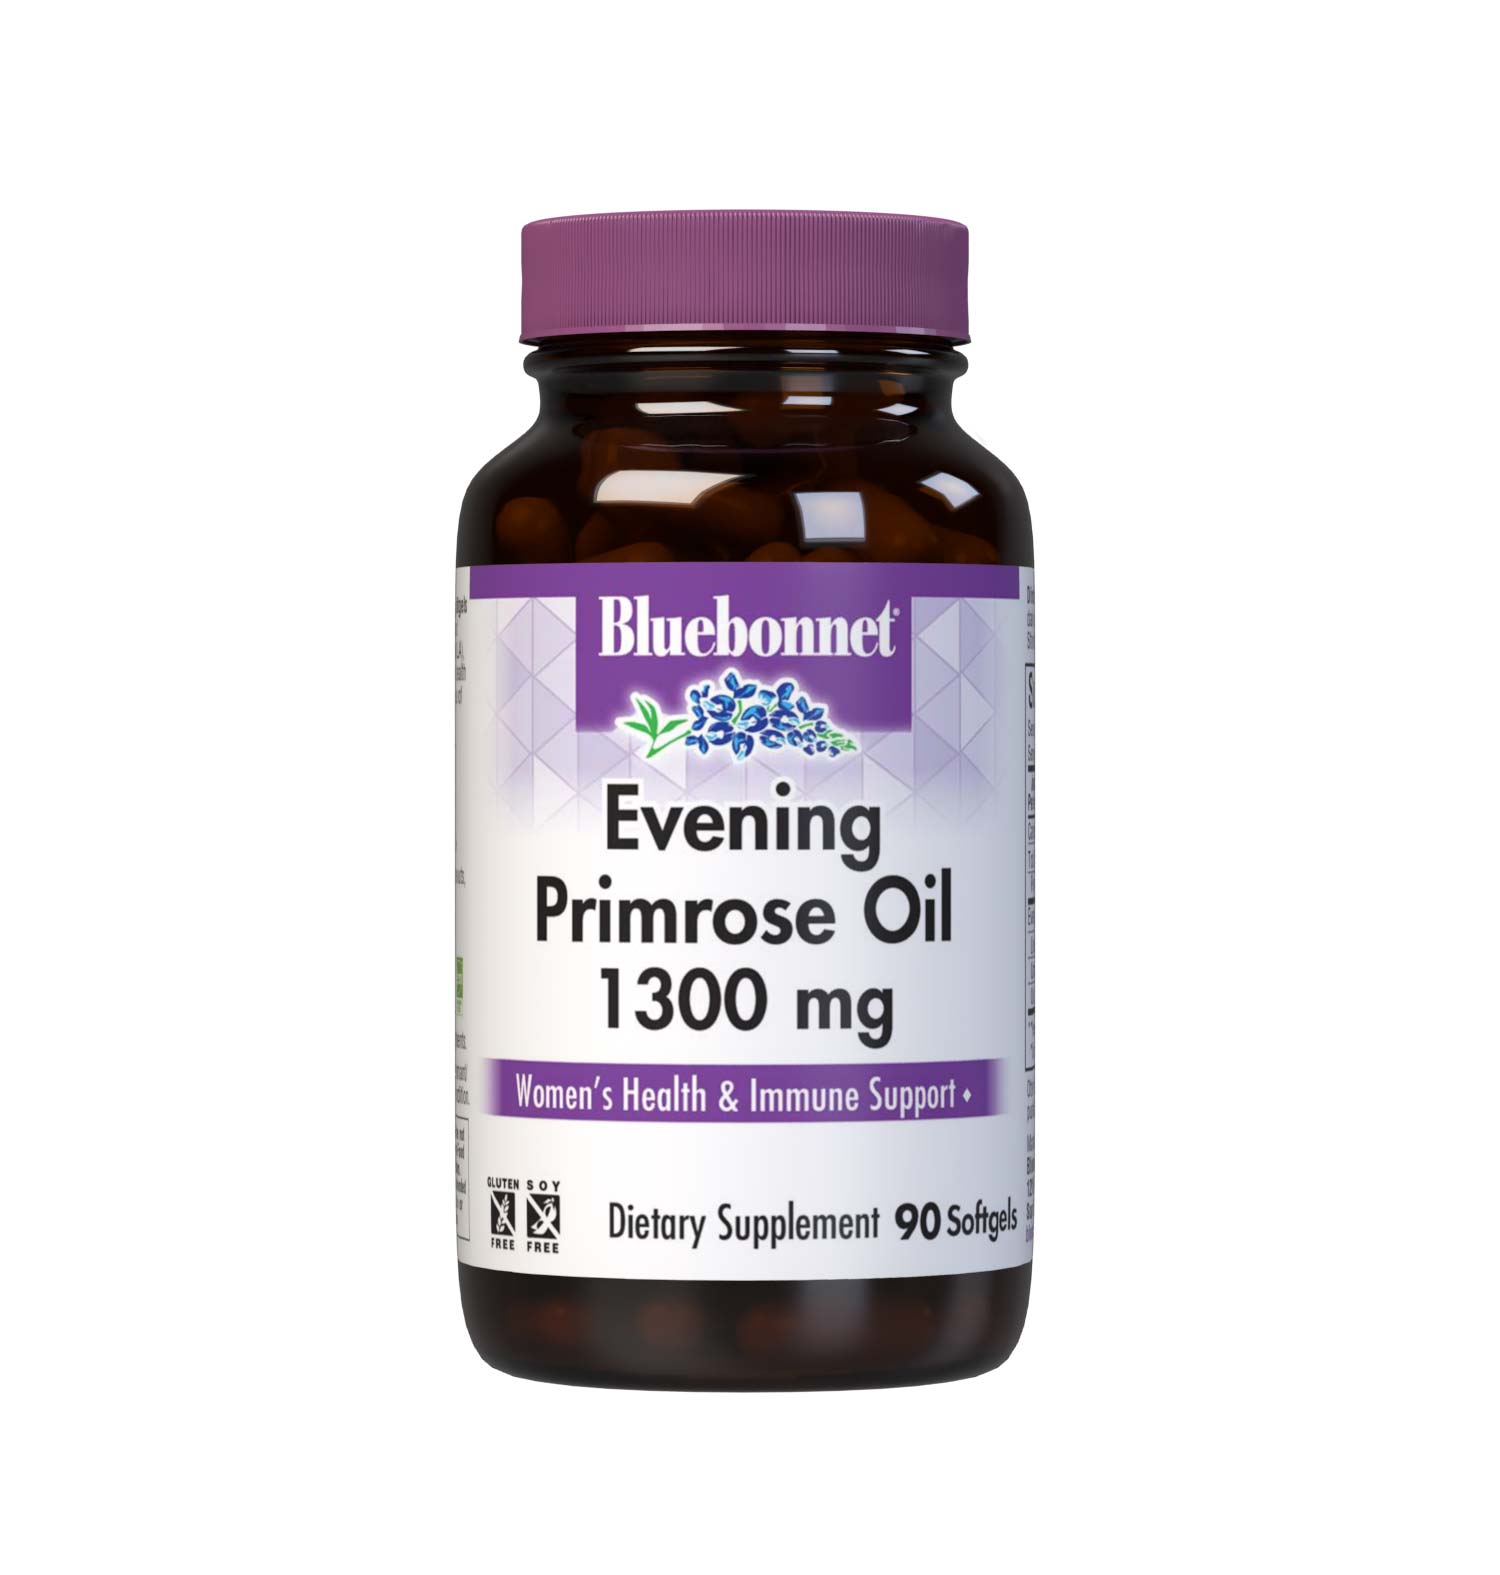 Bluebonnet’s Evening Primrose Oil 1300 mg 90 Softgels are formulated with an oil from the seed of the evening primrose seed oil, a source of unsaturated fatty acids- gamma linolenic acid (GLA), linolenic acid, and oleic acid to support women's health and immune health. Cold pressed without the use of chemical solvents. #size_90 count